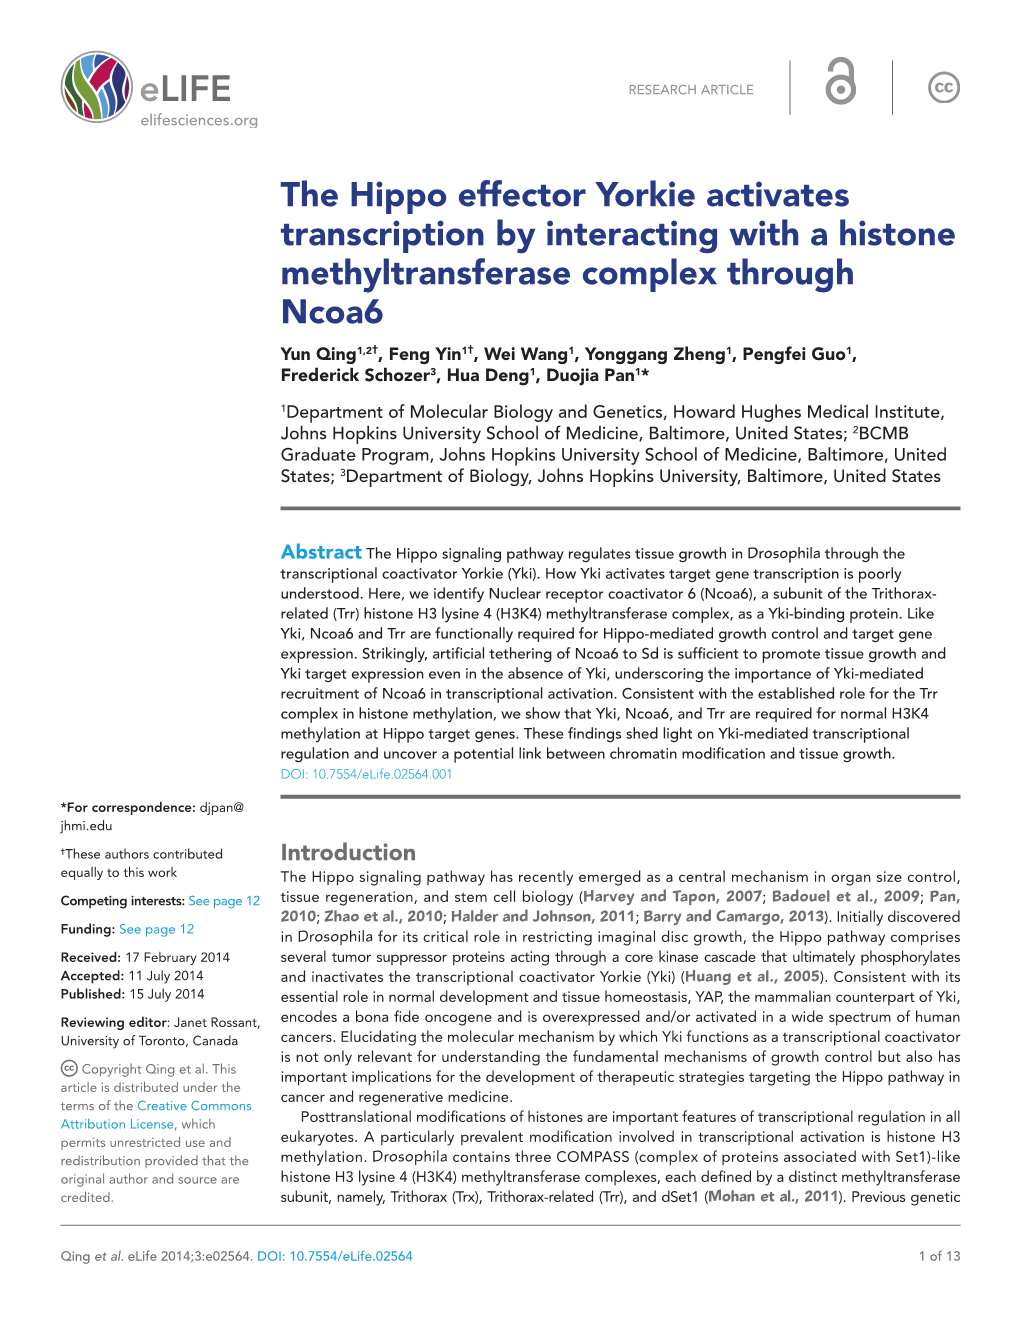 The Hippo Effector Yorkie Activates Transcription by Interacting with A